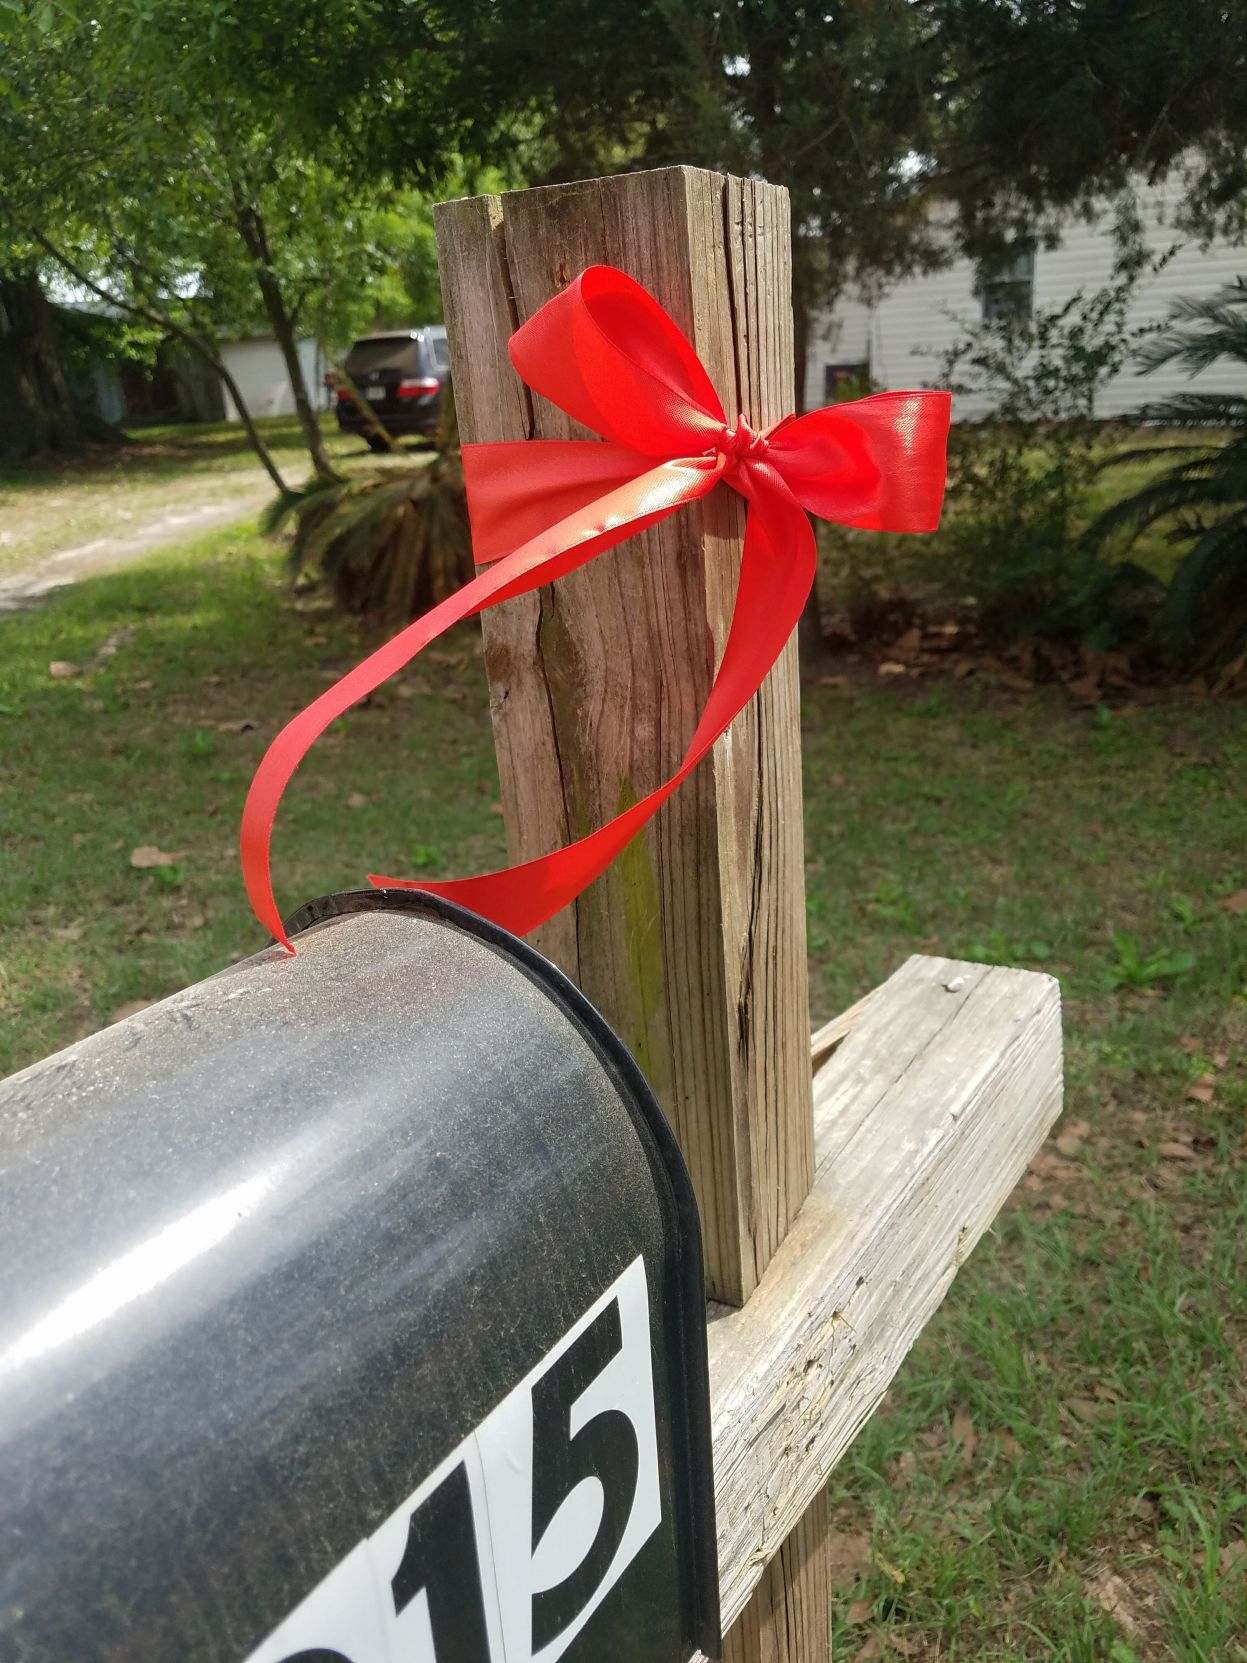 Red ribbons offer sign of faith, Covid-19